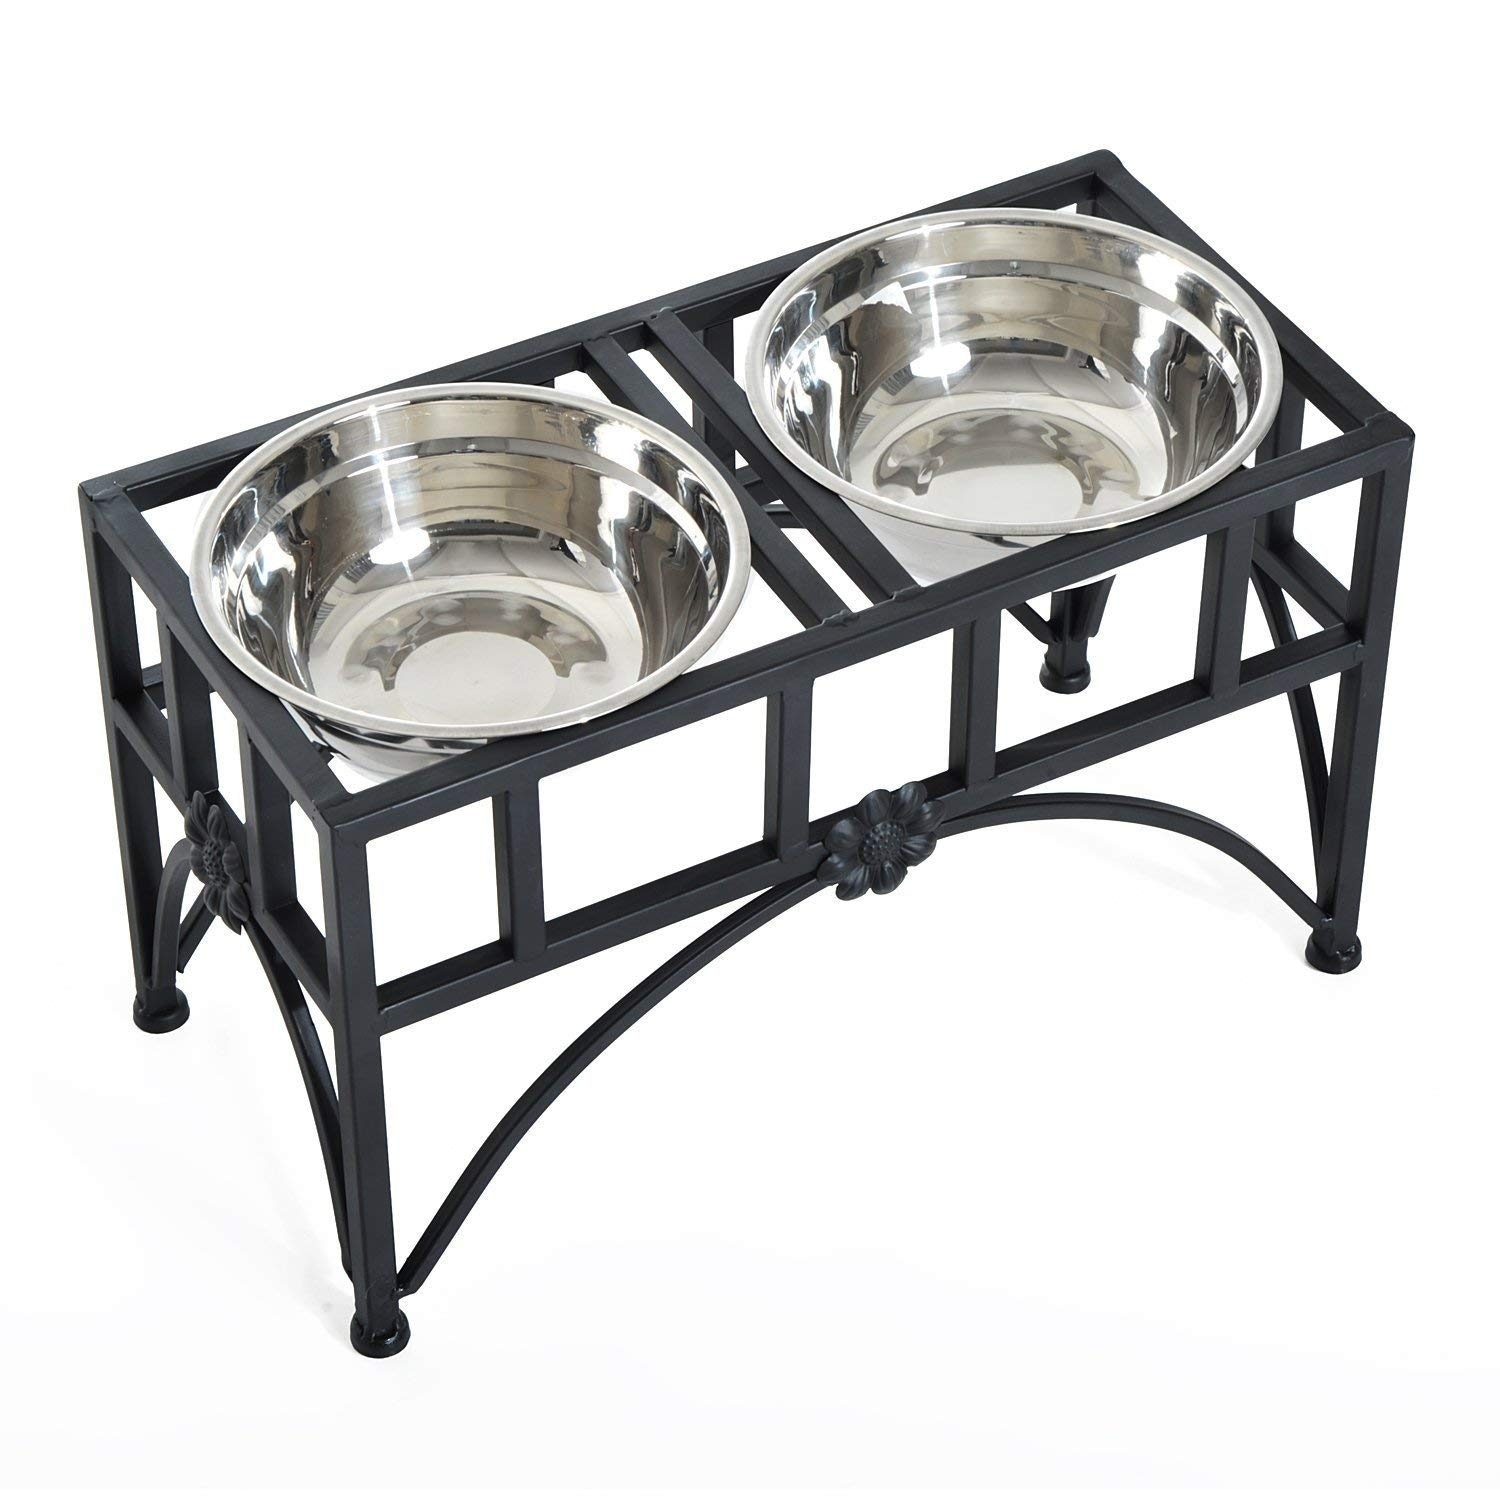 PawHut 17 Double Stainless Steel Heavy Duty Dog Food Bowl Elevated Pet Feeding Station